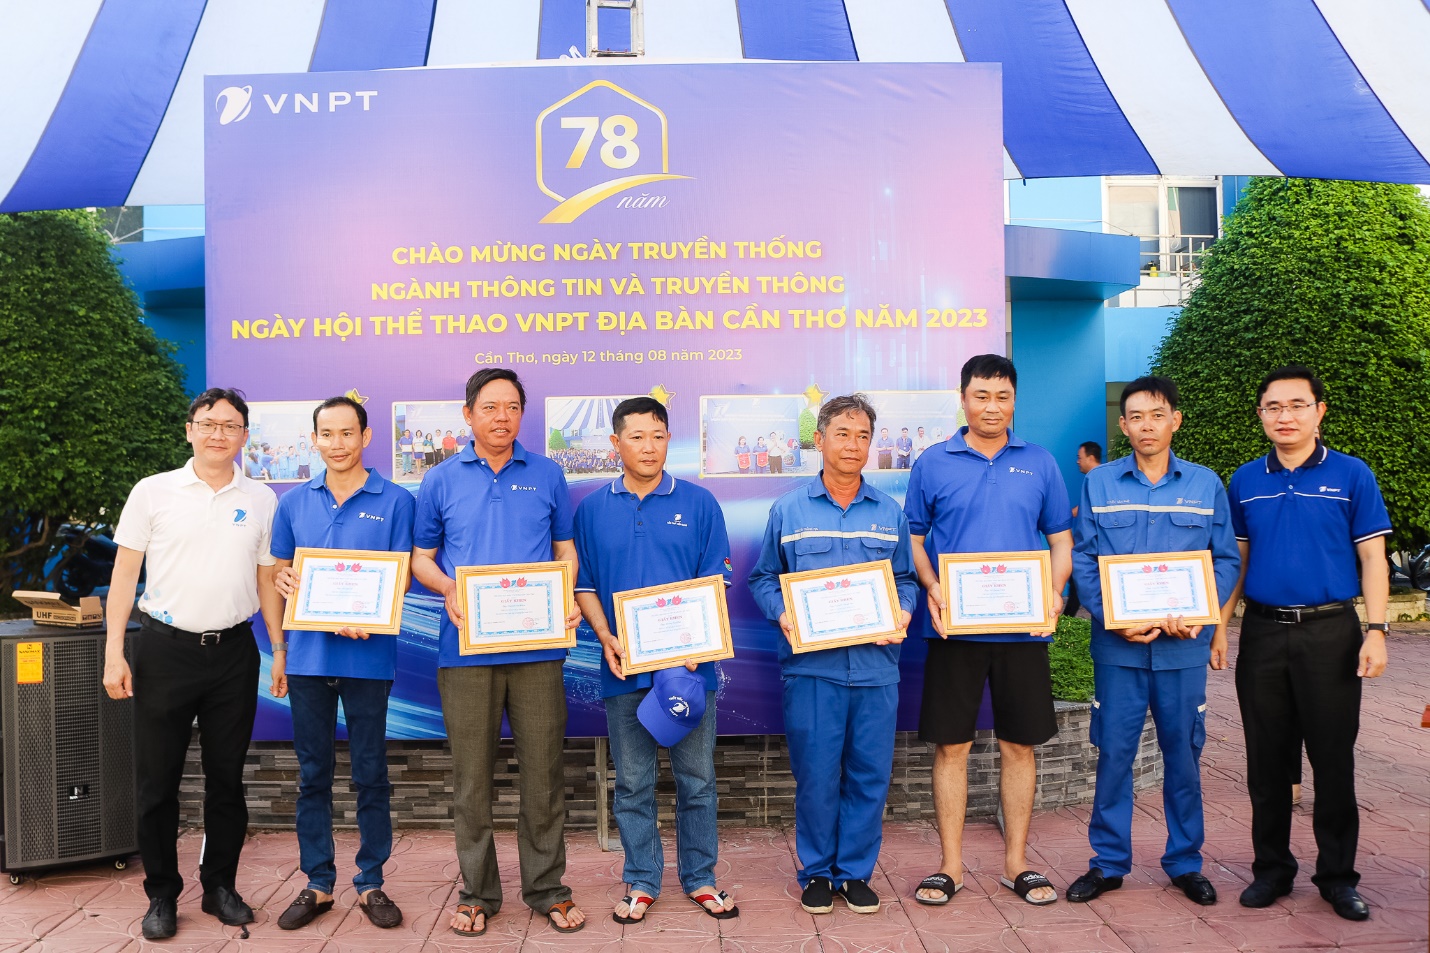 On the occasion of the Traditional Day of the Information and Communications Industry in 2023, Mr Ngo Xuan Phuc, Chief Representative and Director of VNPT Can Tho (left), recognised units and employees for their exceptional accomplishments